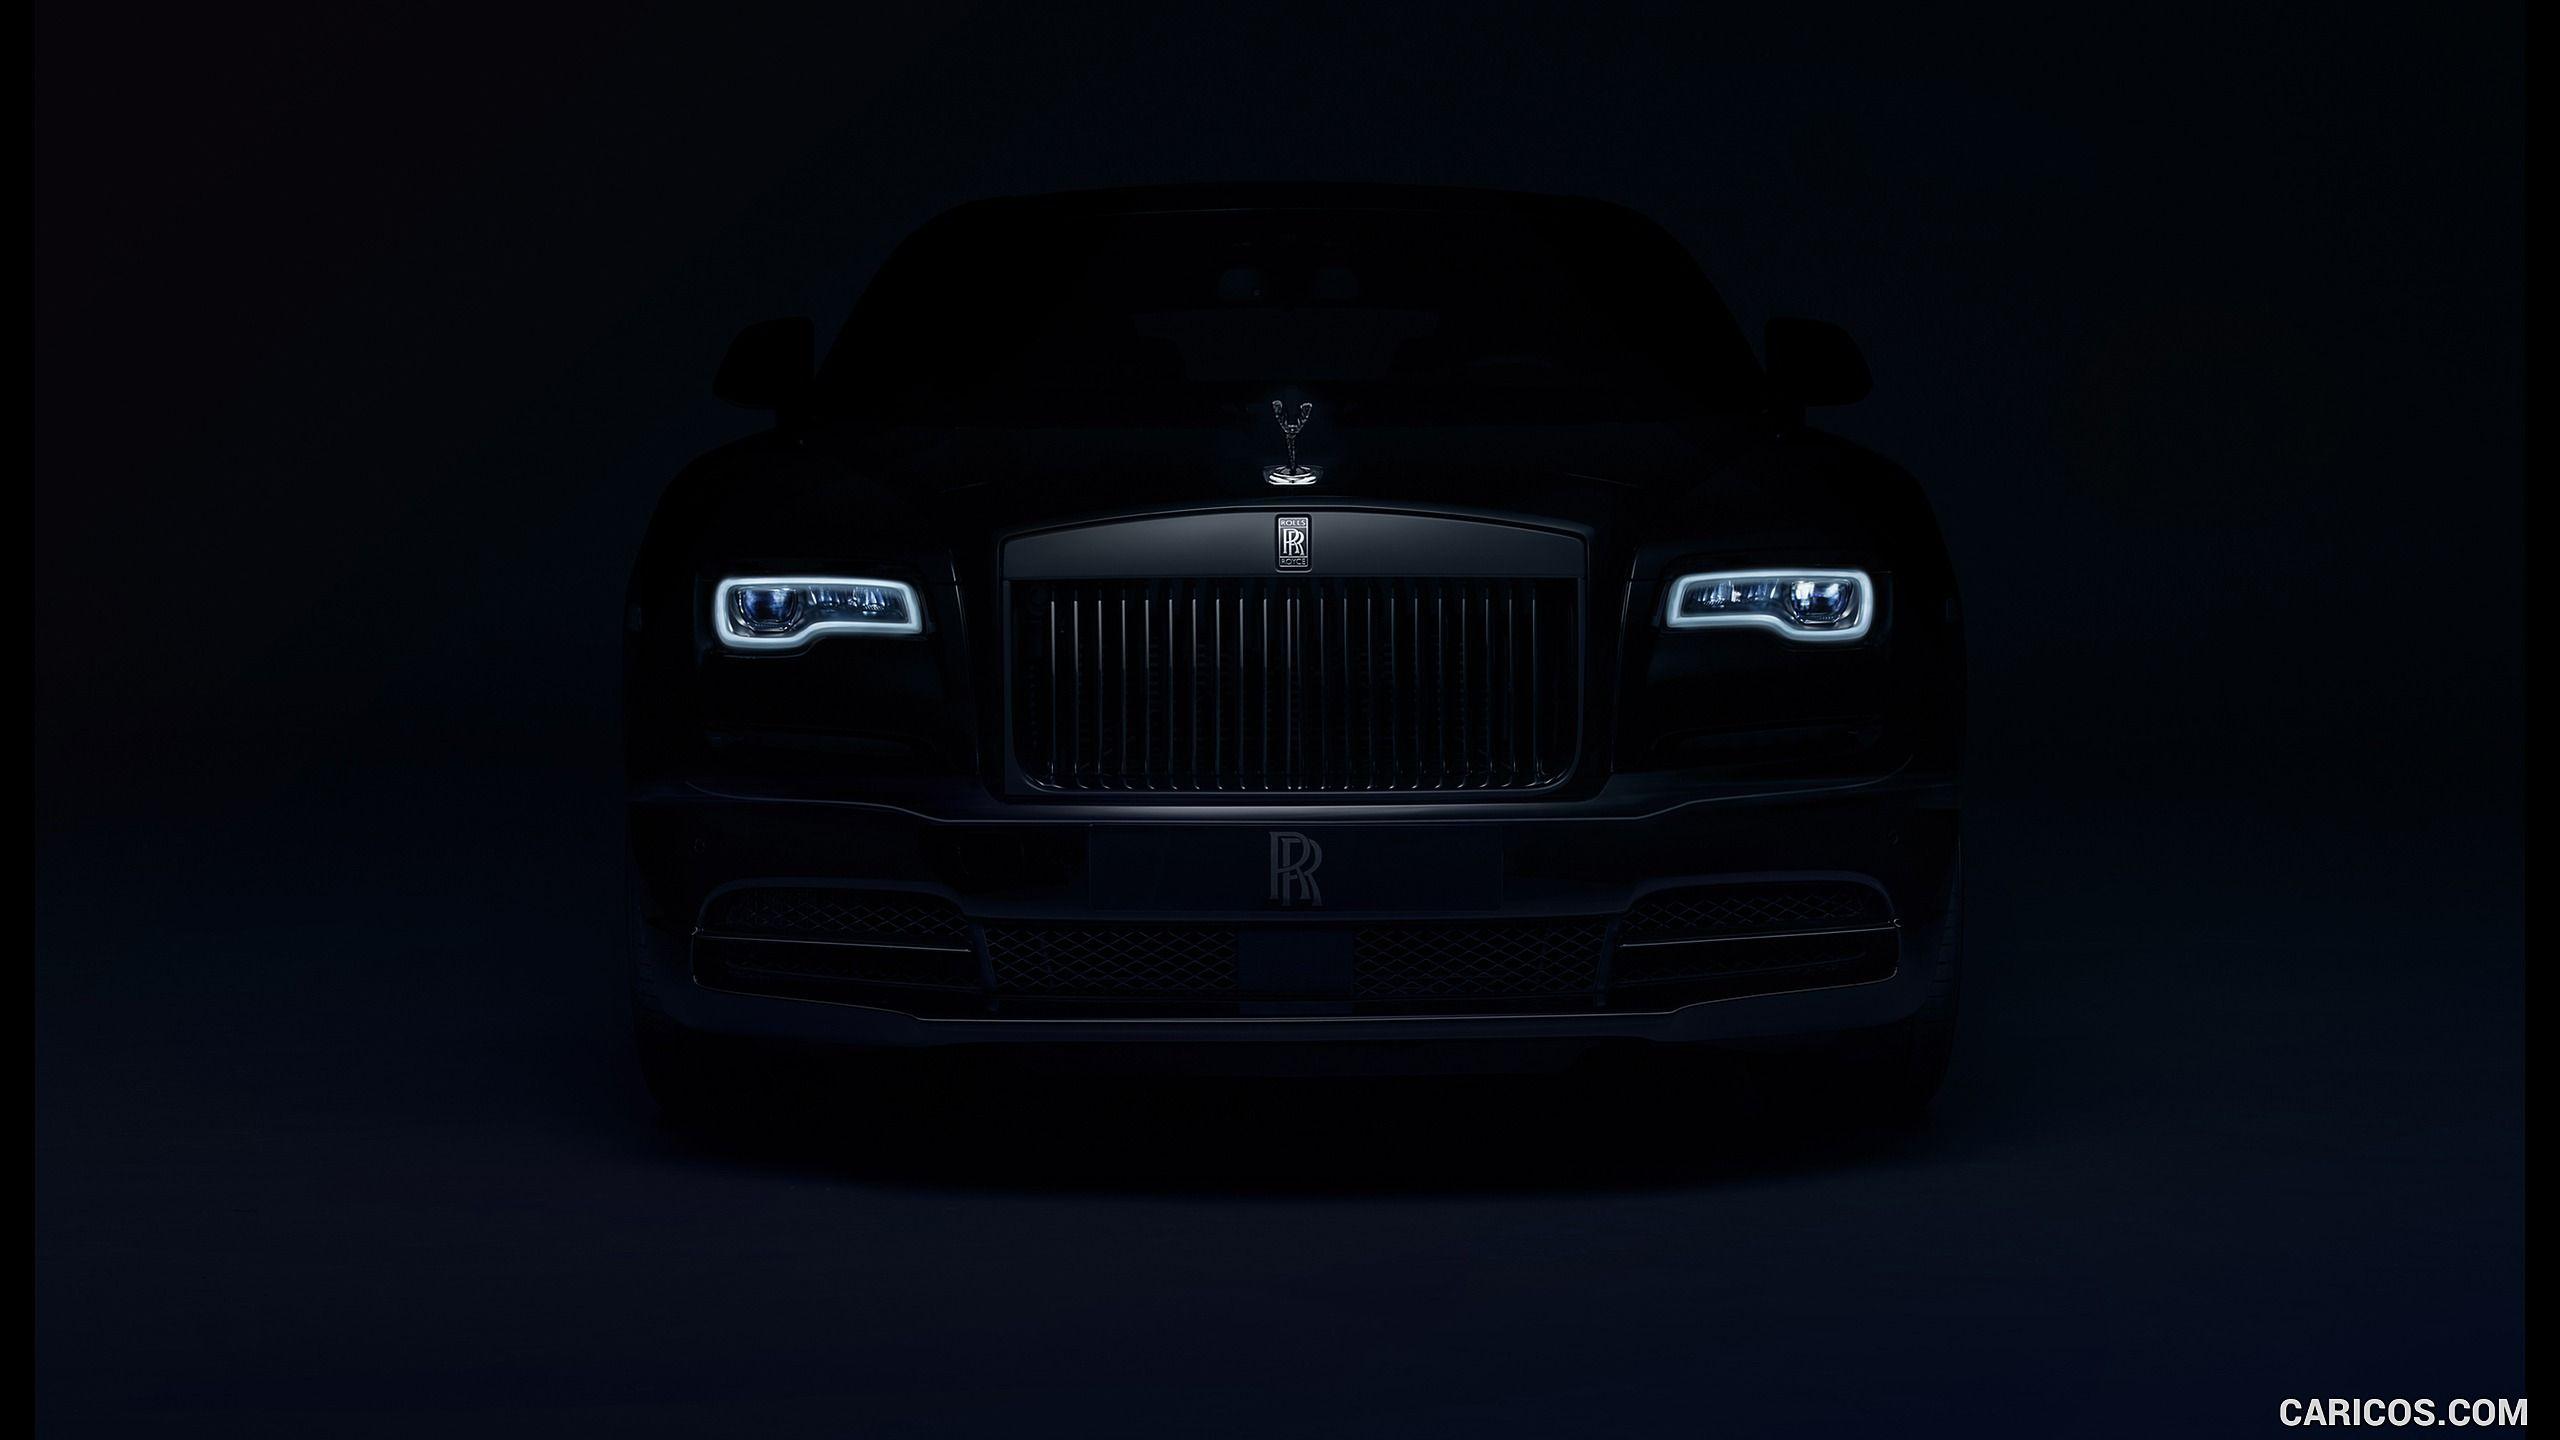 Rolls Royce Wraith And Ghost Black Badge. Rolls Royce, Rolls Royce Wraith, Rolls Royce Black